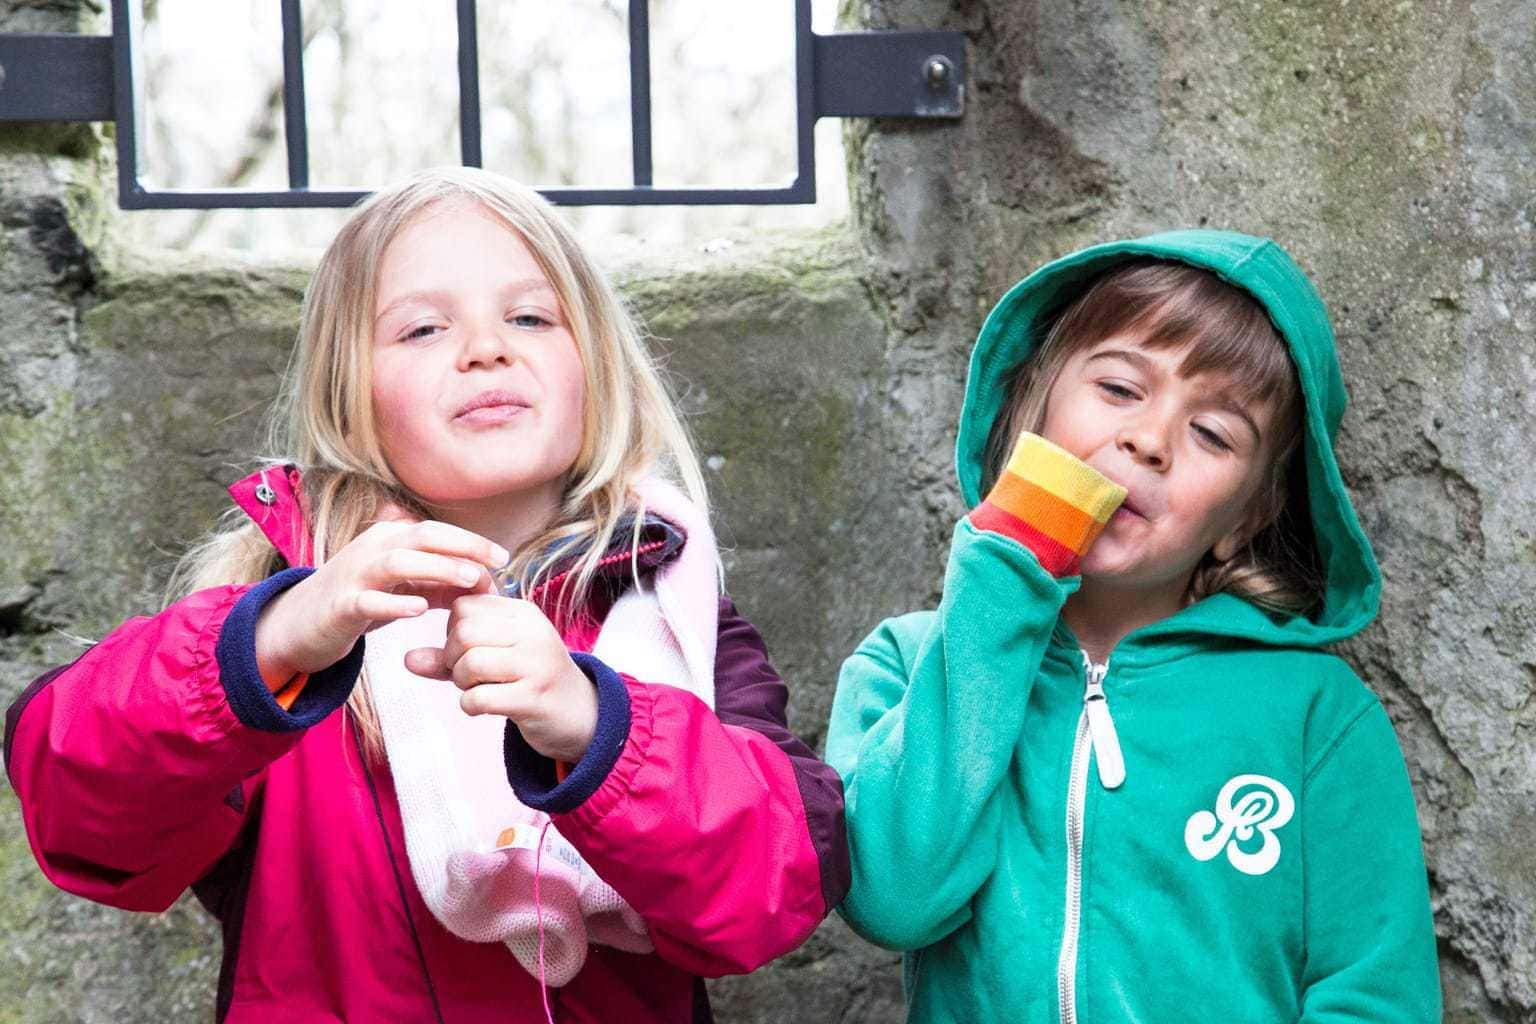 5 Reasons to Visit Oystermouth Castle with Kids www.minitravellers.co.uk